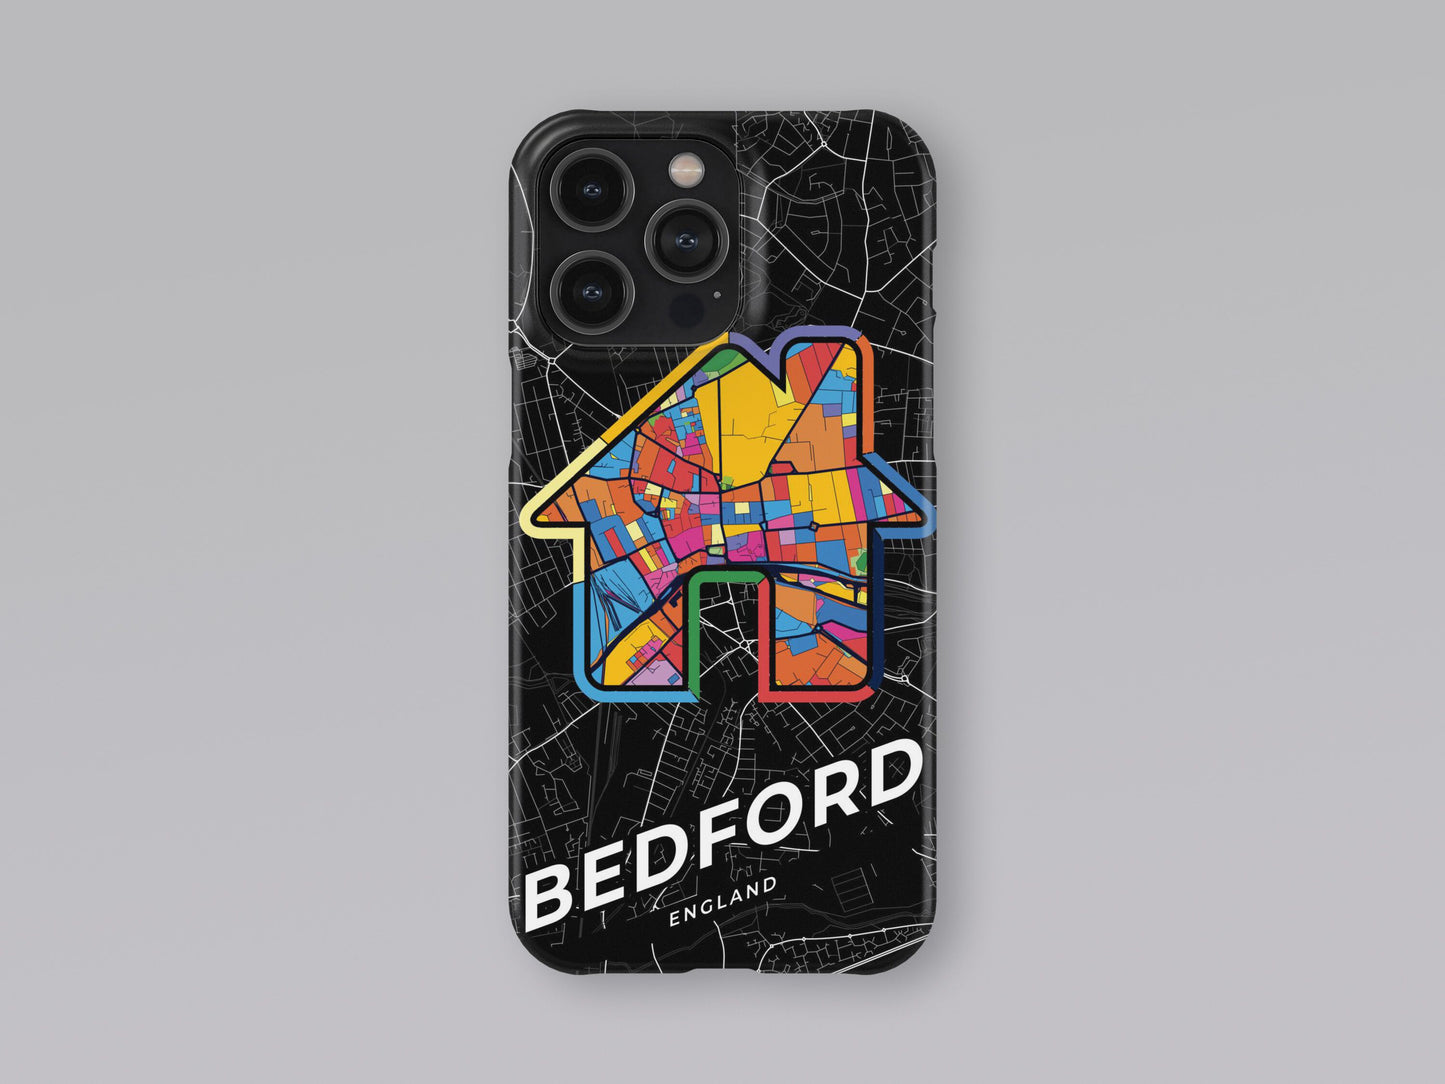 Bedford England slim phone case with colorful icon. Birthday, wedding or housewarming gift. Couple match cases. 3